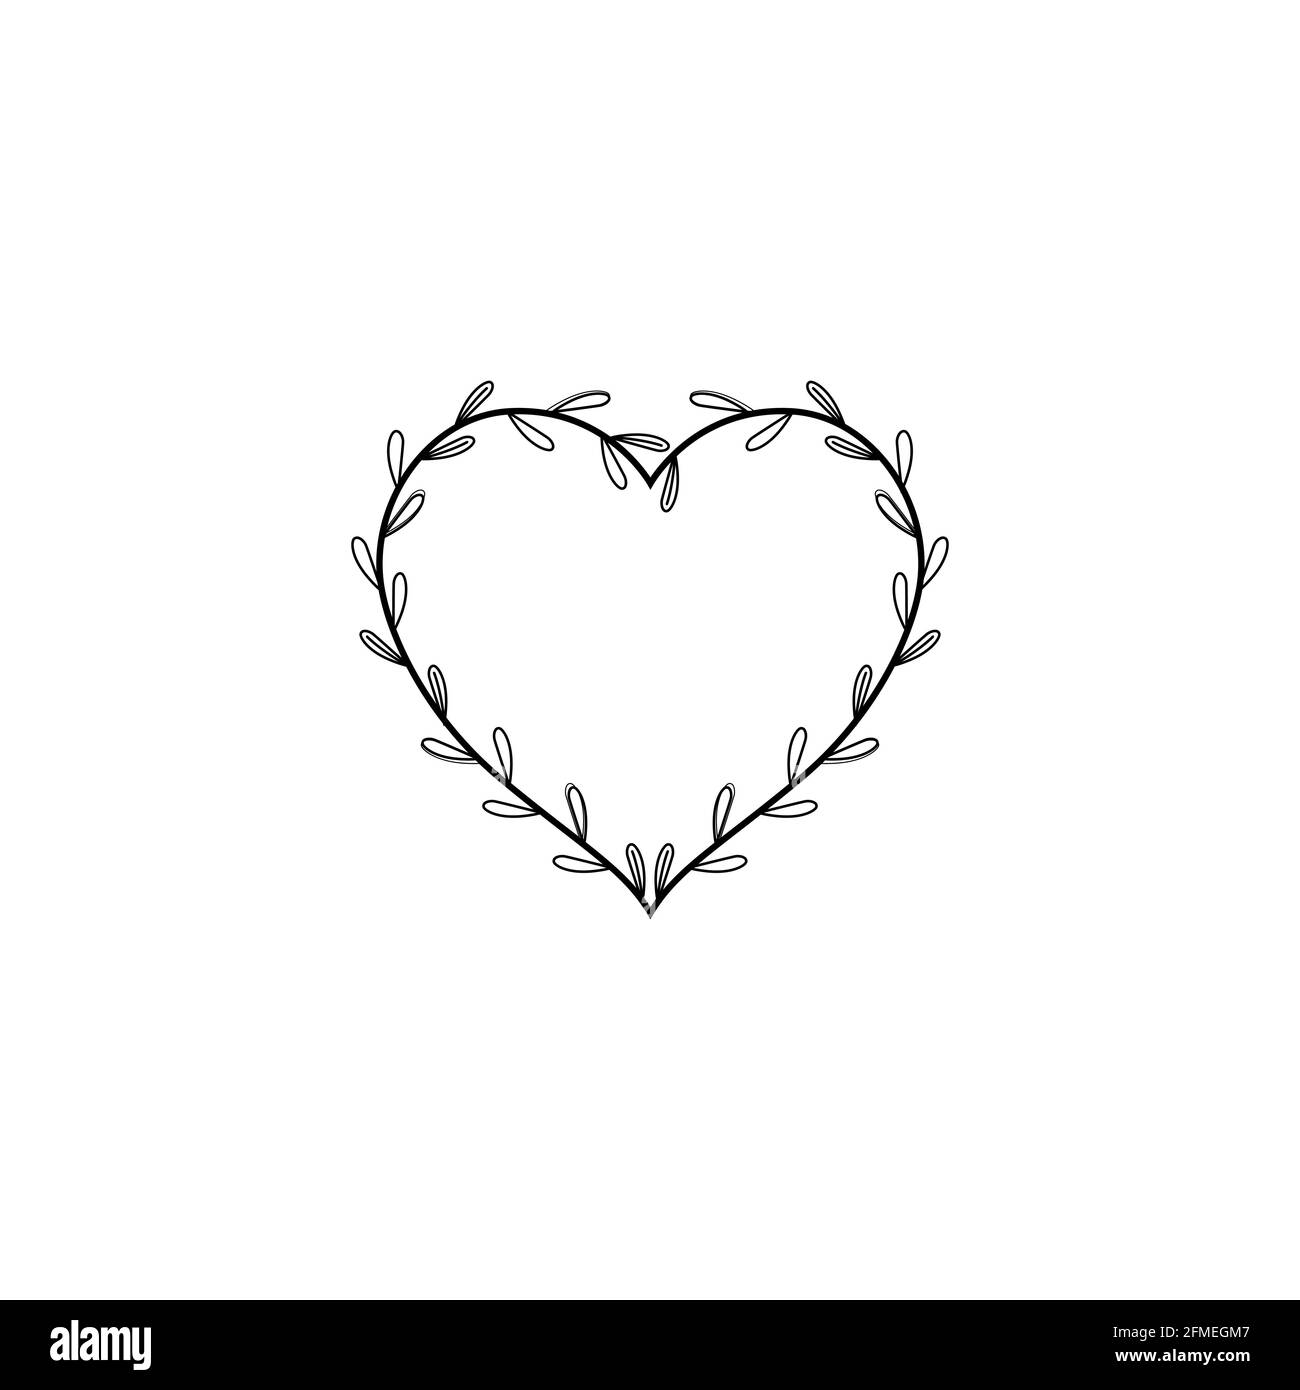 Leaves form a heart design. template for romantic or environmental design. Stock Vector